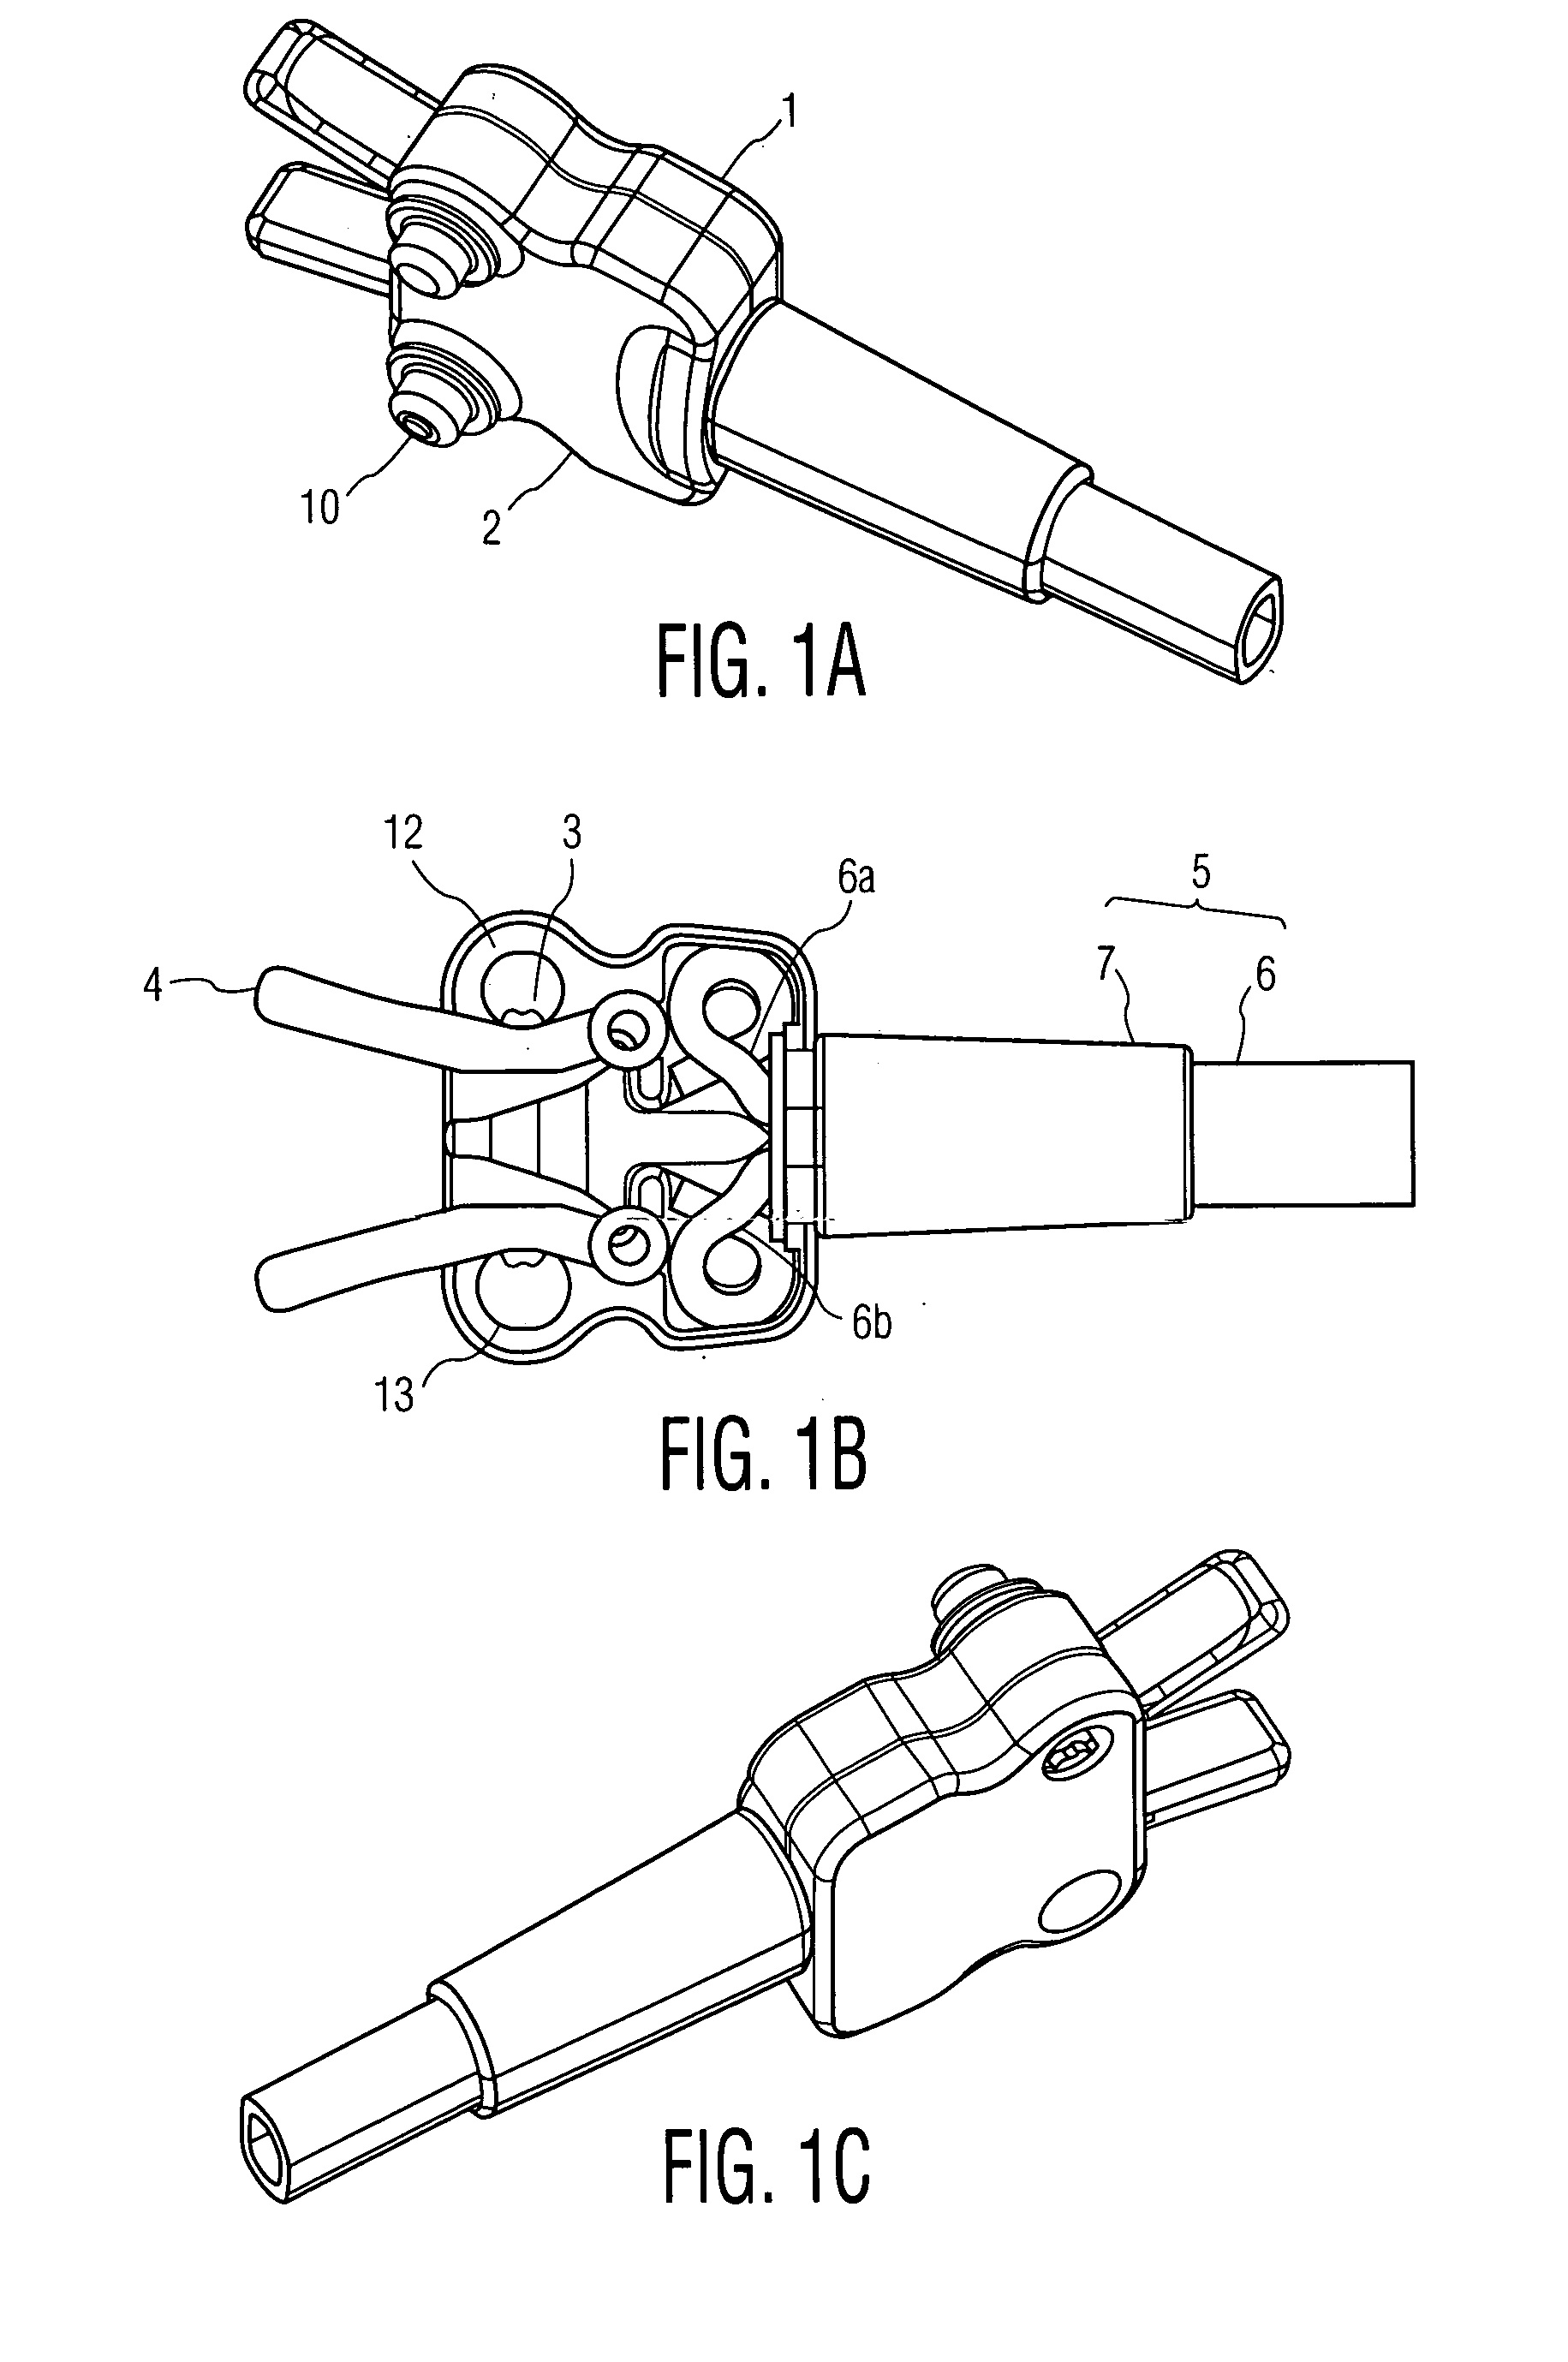 Double connector for medical sensor